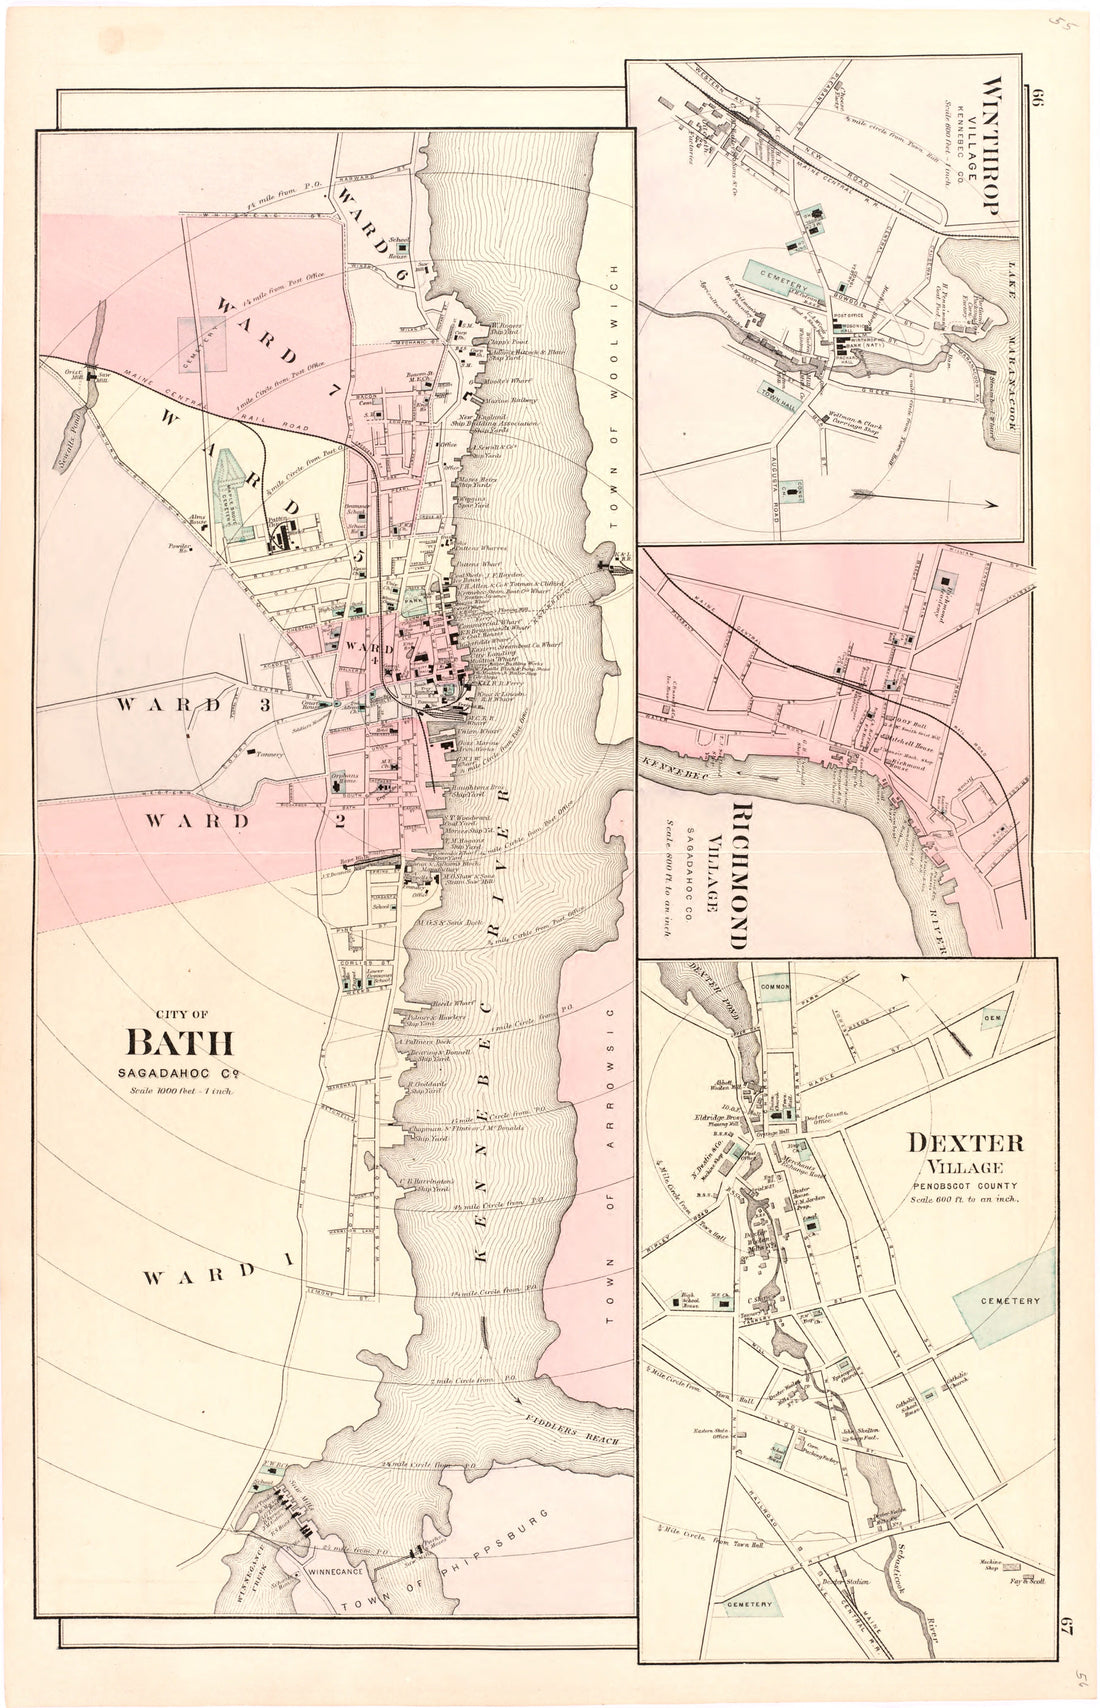 This hand drawn illustration (map) of City of Bath; Winthrop Village; Richmond Village; Dexter Village from Colby&